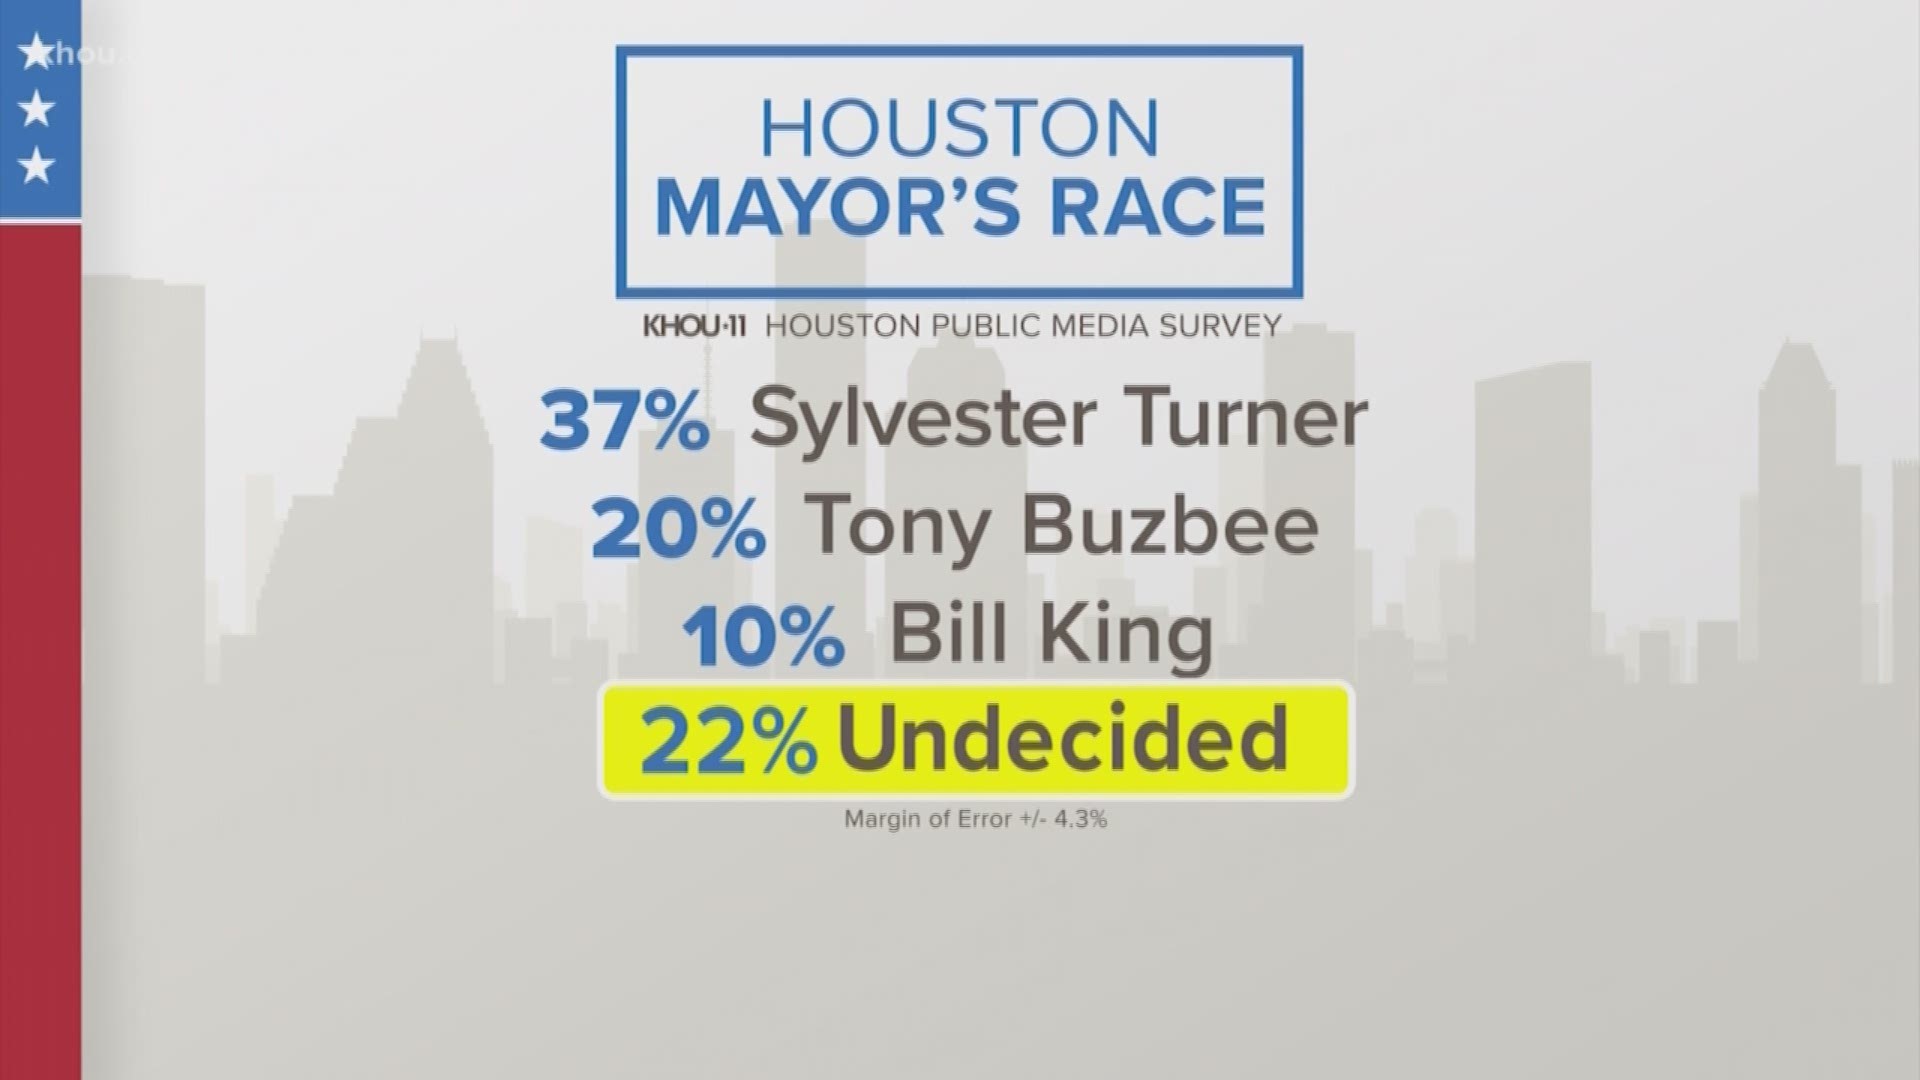 Who will be Houston's next mayor and what issues are likely voters most concerned about? Our exclusive mayoral poll answers those questions and more.